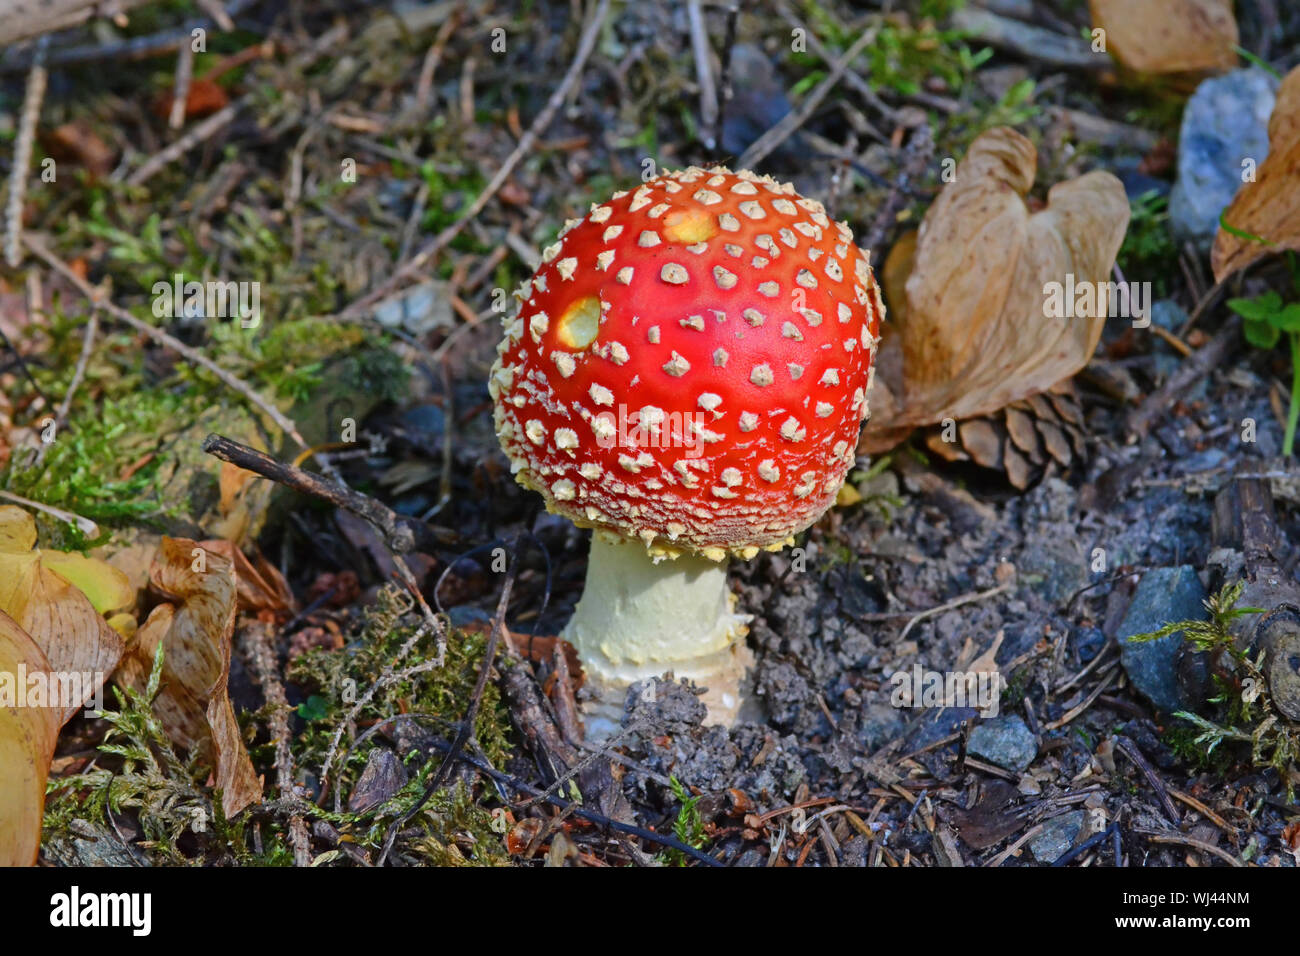 The Amanite Muscaria otherwise known as the Fly Agaric, source of the psycho-active drug Muscarine used by shamans for over 20,000 years. Stock Photo